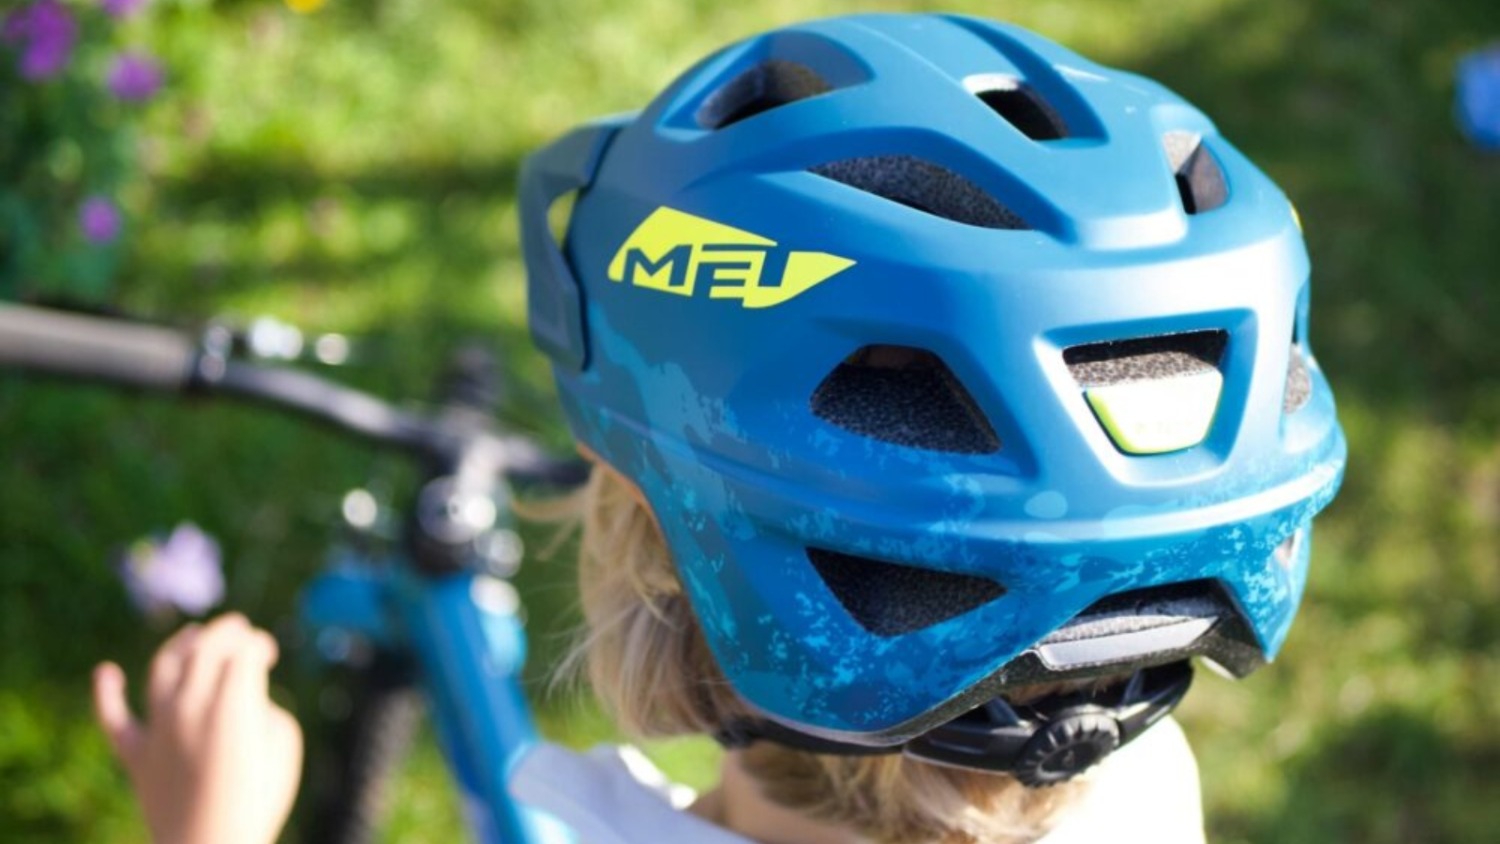 A close up view from behind of a child wearing a blue Met helmet